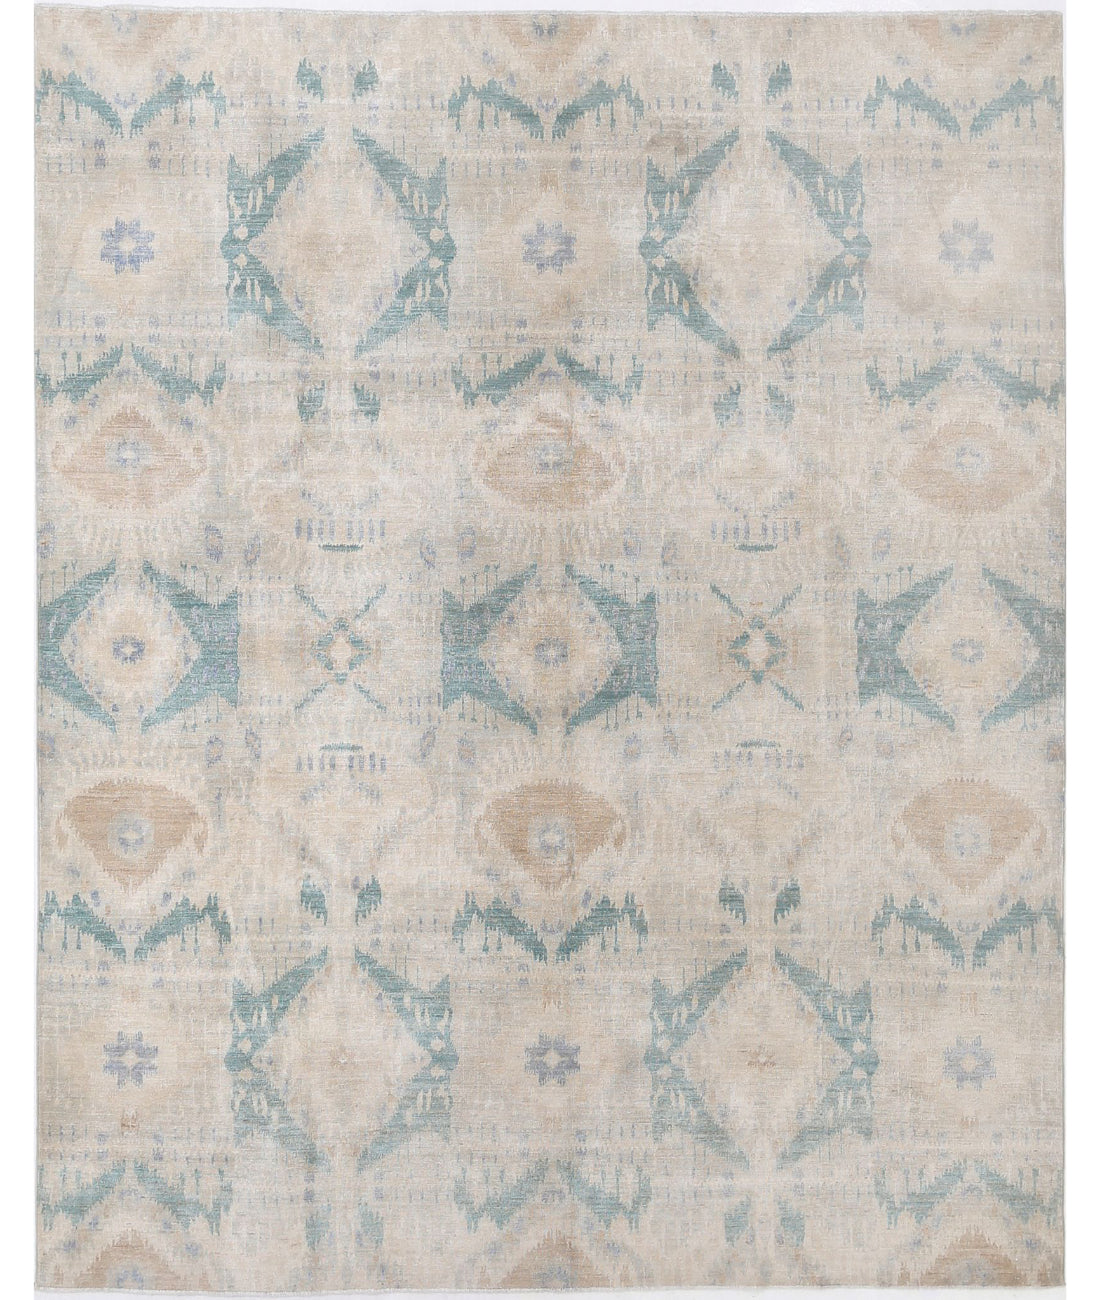 Hand Knotted Ikat Wool Rug - 7'10'' x 9'10'' 7'10'' x 9'10'' (235 X 295) / Ivory / Green